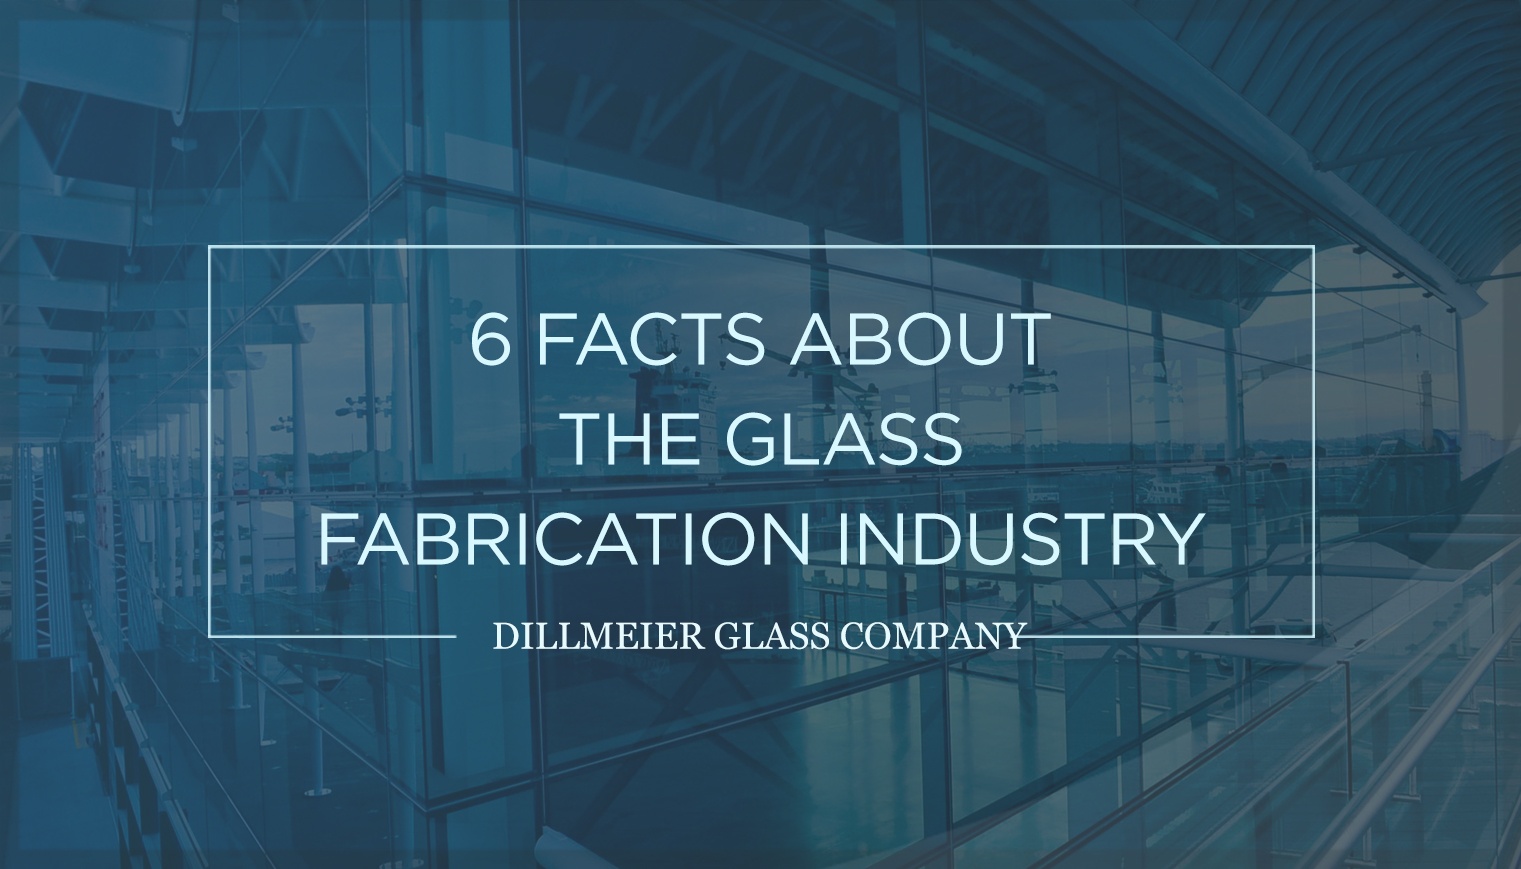 6 Facts About the Glass Fabrication Industry